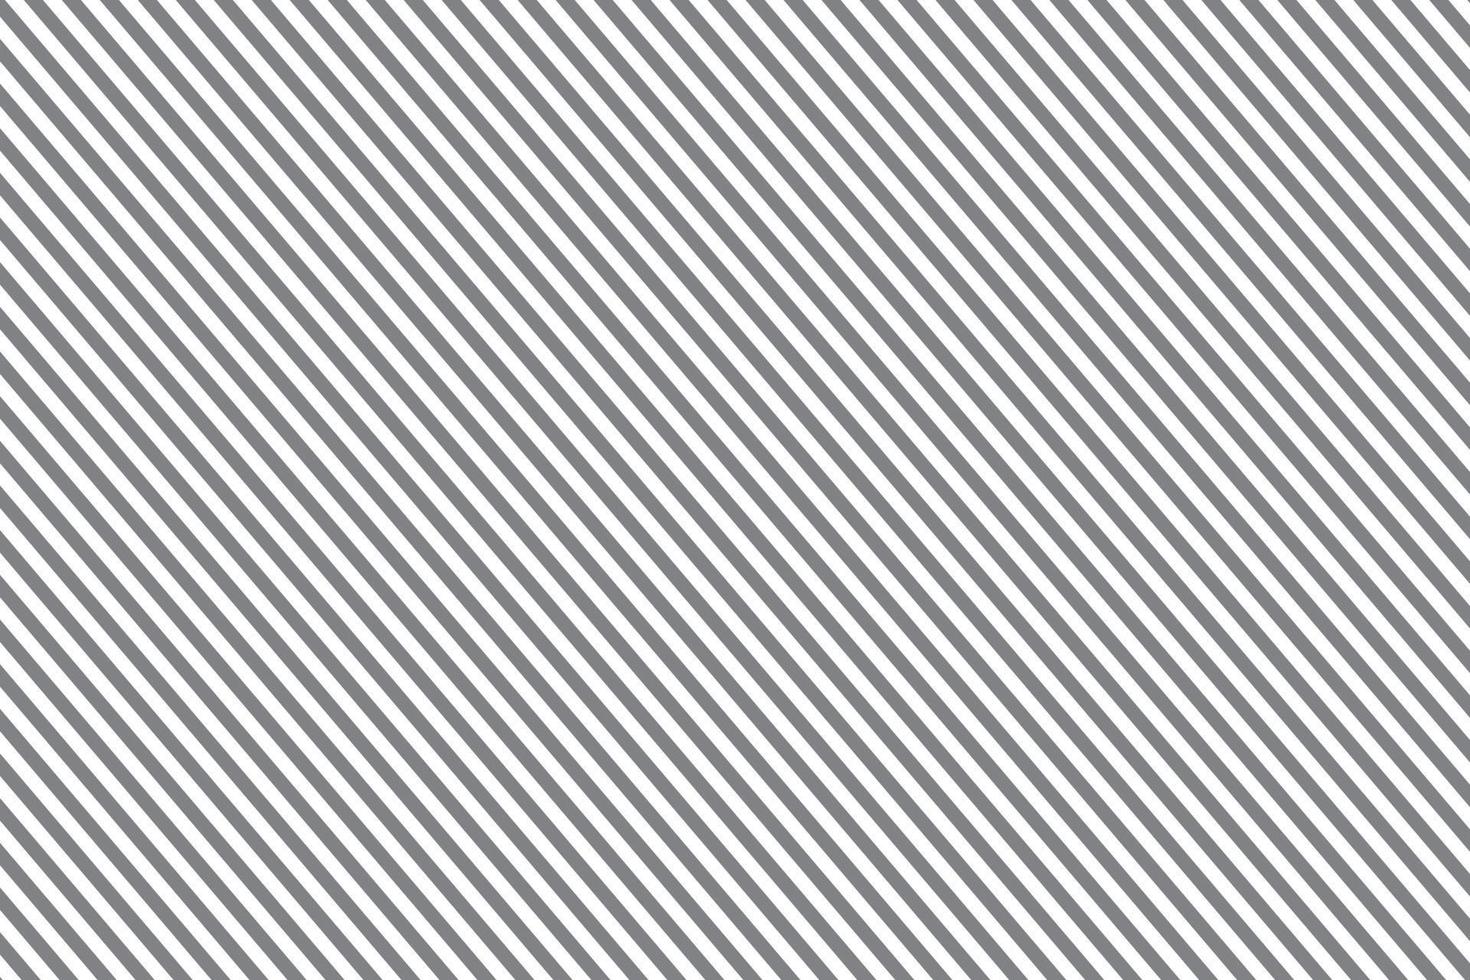 abstrac wavy simple grey pattern on white background. vector